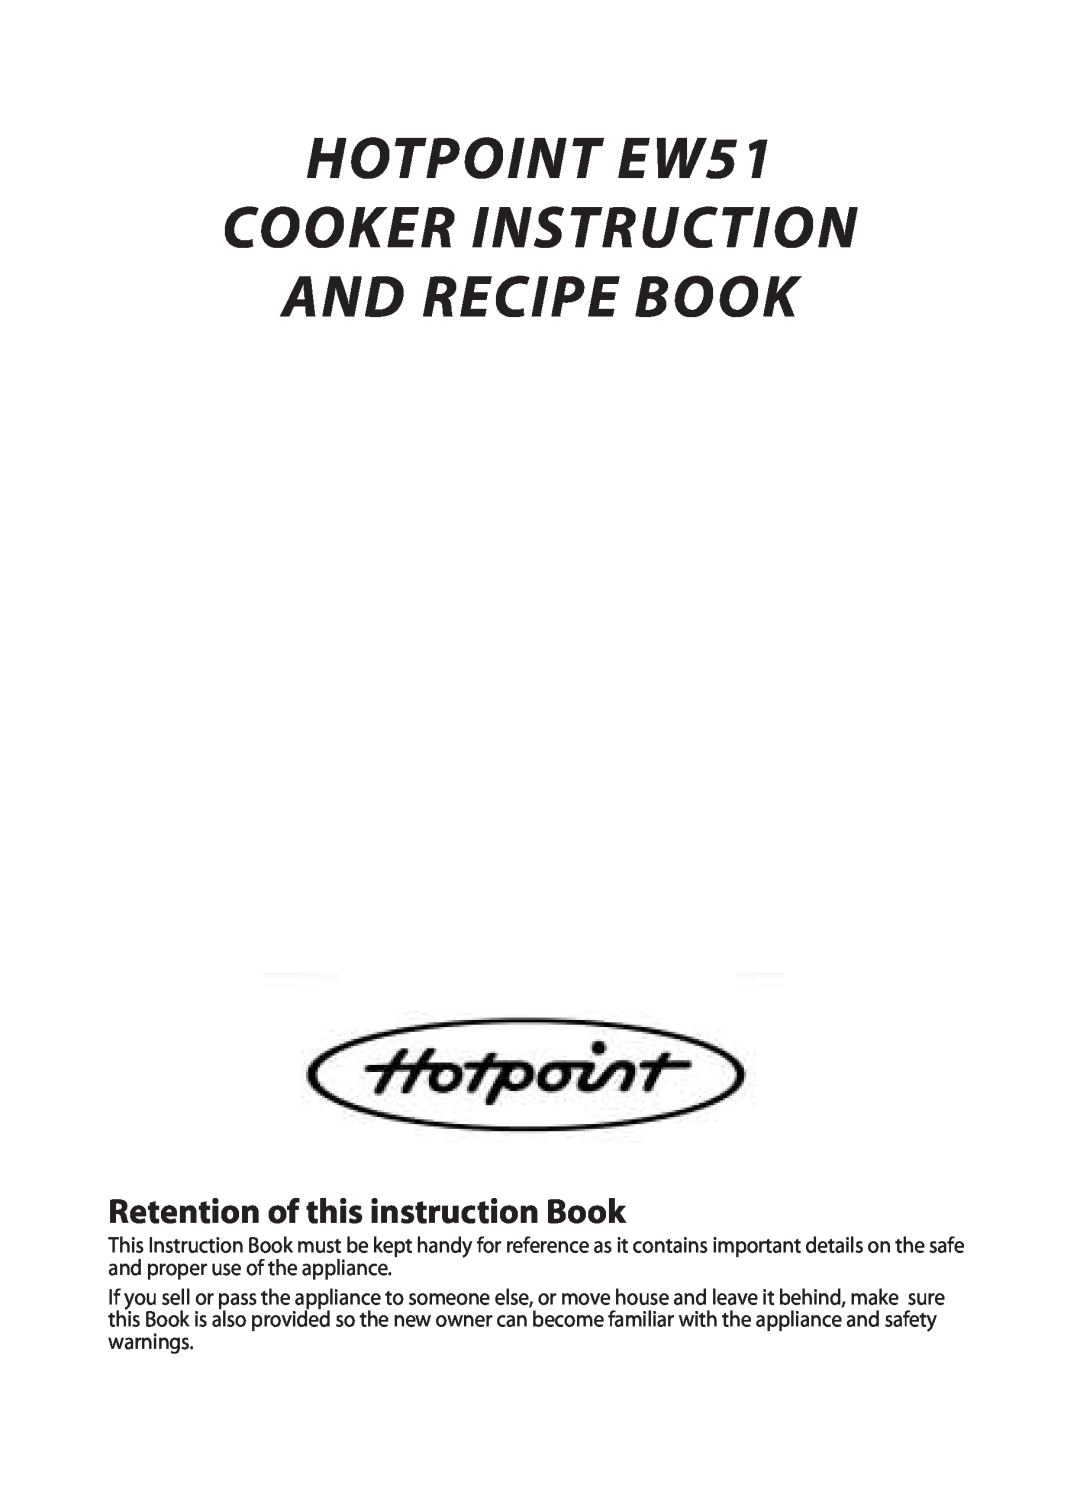 Hotpoint manual Retention of this instruction Book, HOTPOINT EW51 COOKER INSTRUCTION AND RECIPE BOOK 